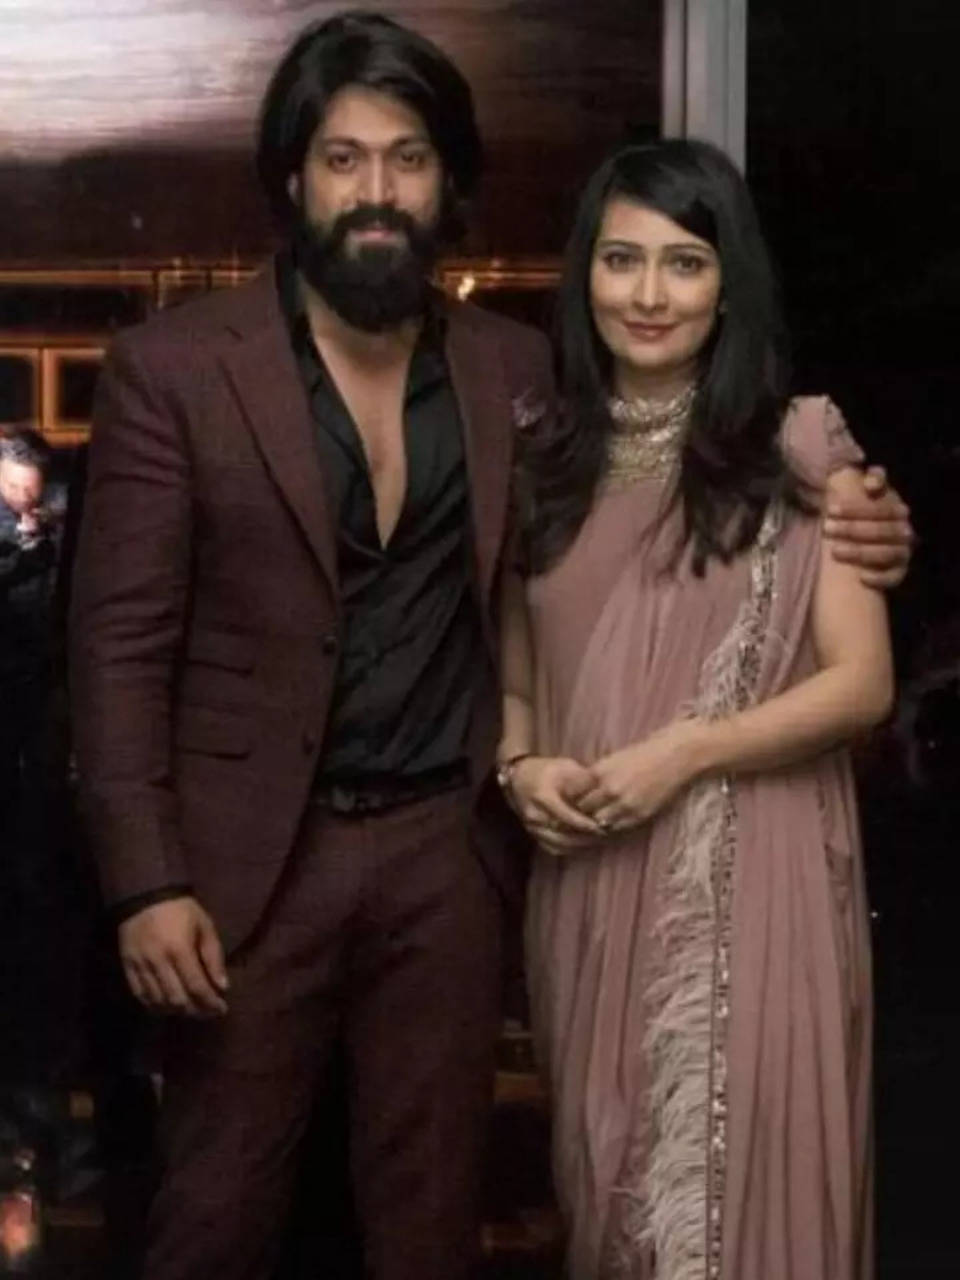 KGF's actor Yash and Radhika Pandit's love story! | Times of India